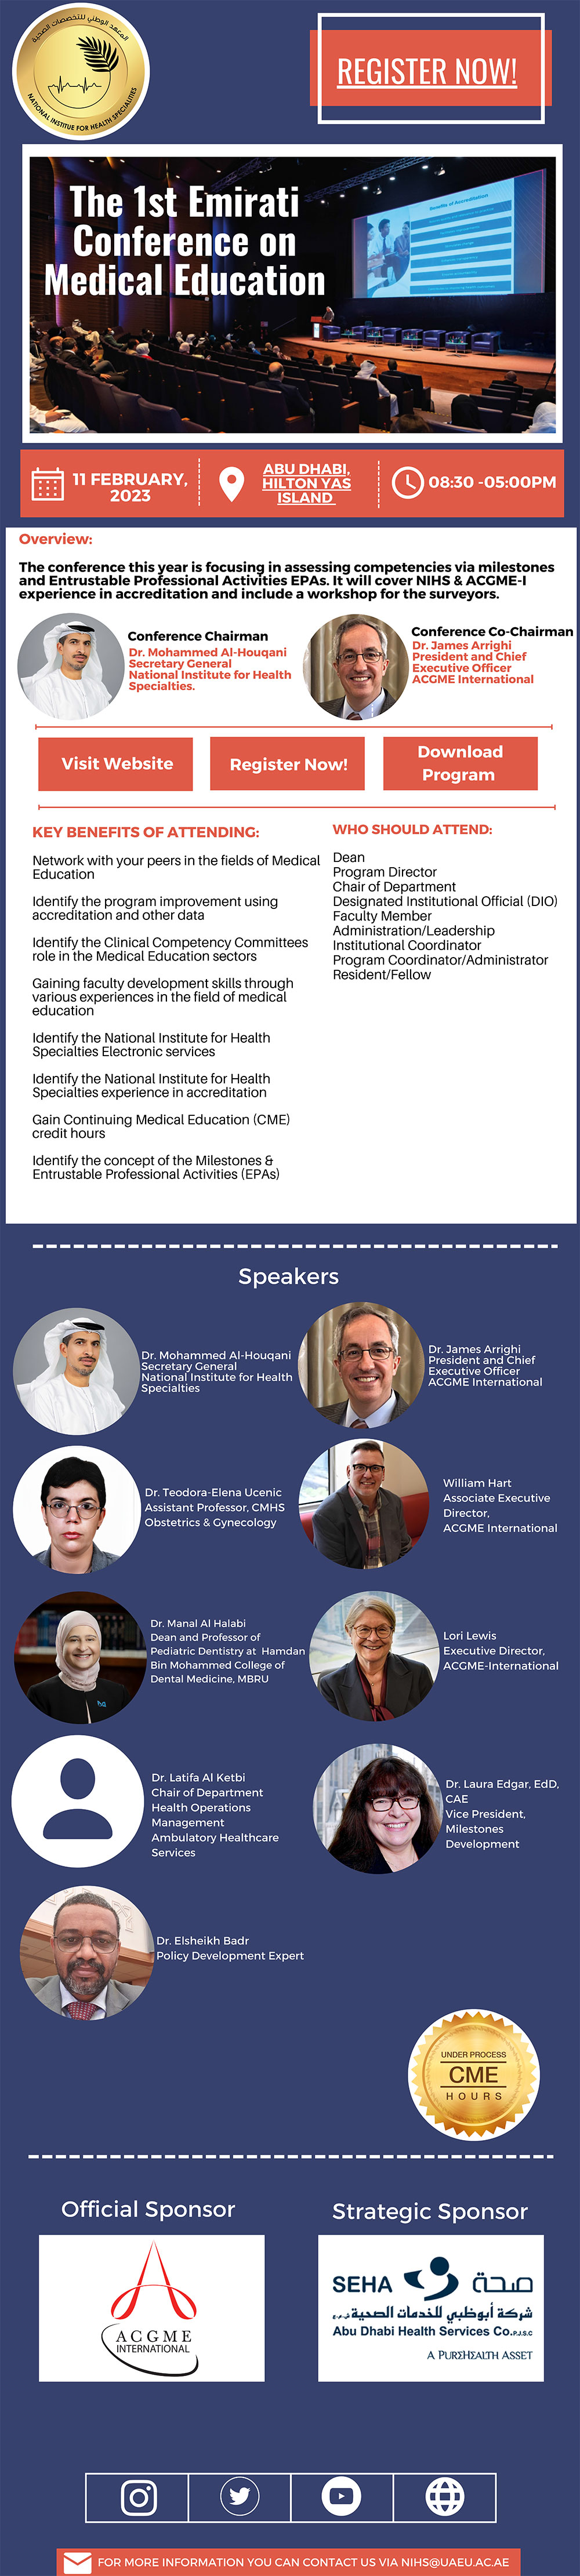 The 1st  Emirati Conference on Medical Education (ECME)